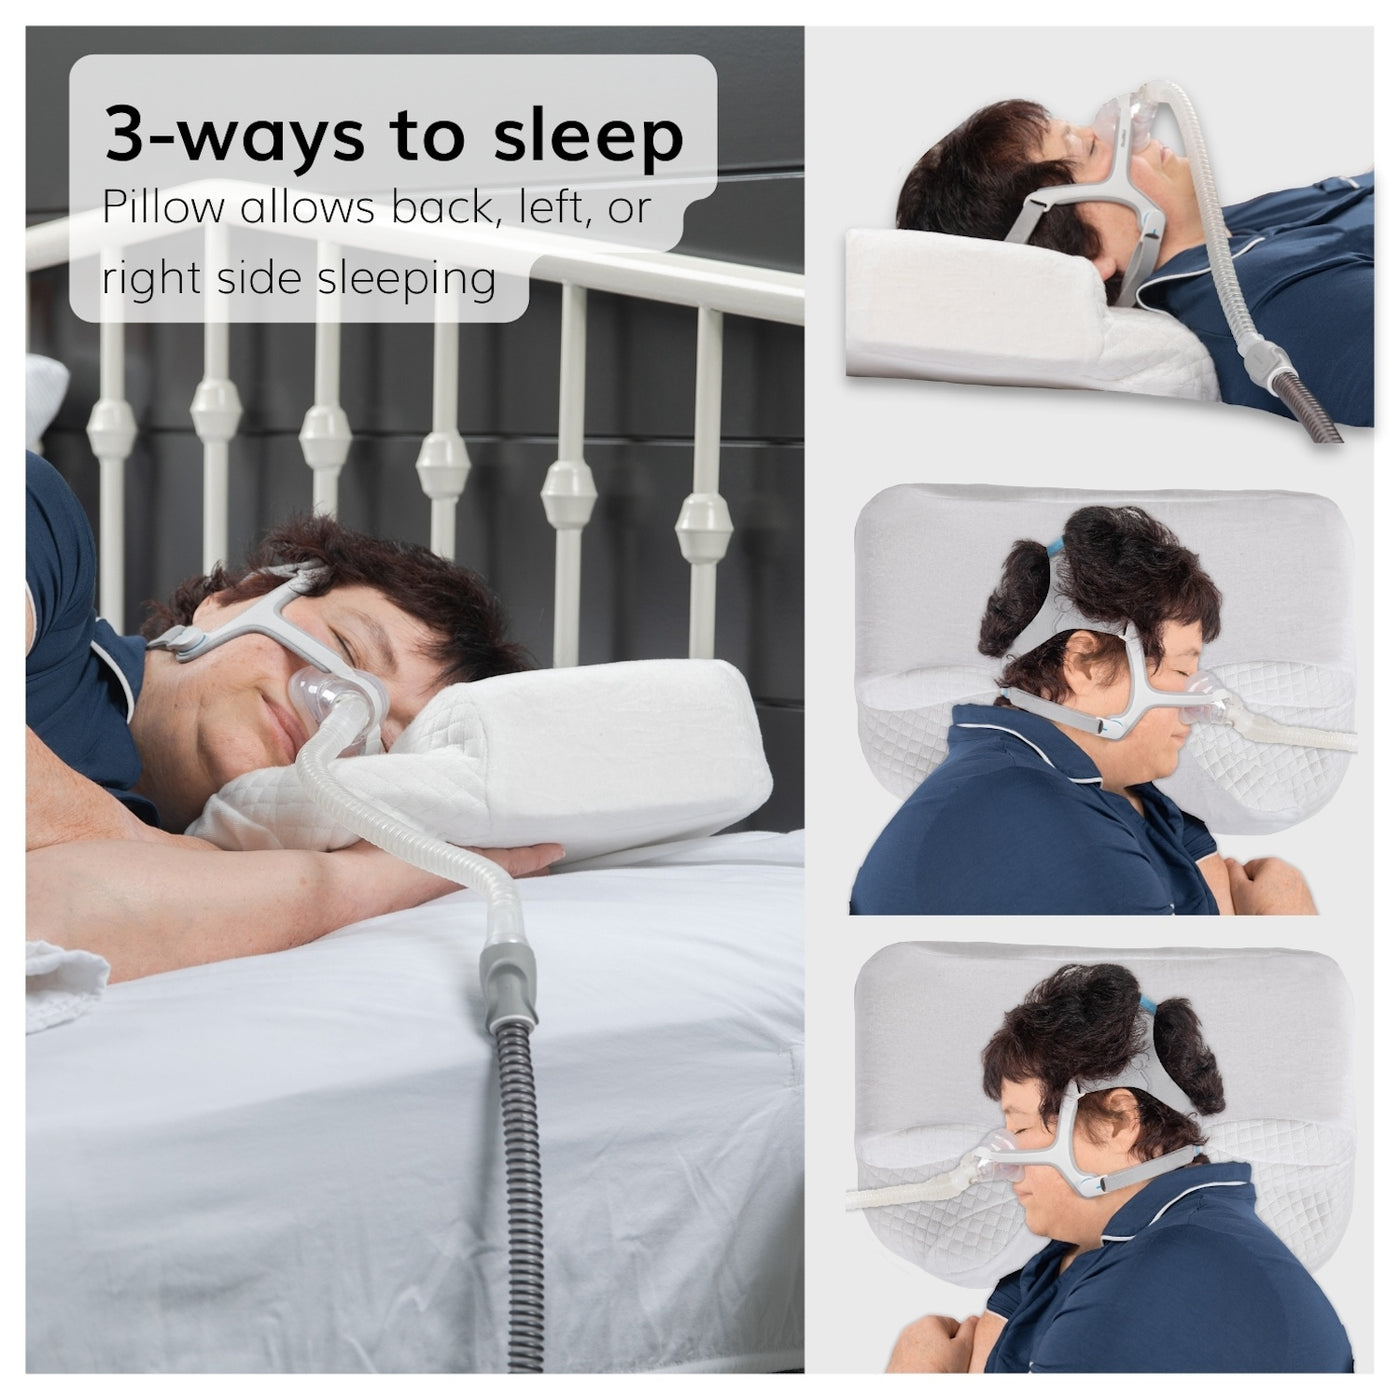 The BraceAbility wedged sleep apena pillow allows you to sleep on your back, left, or right side with a mask on